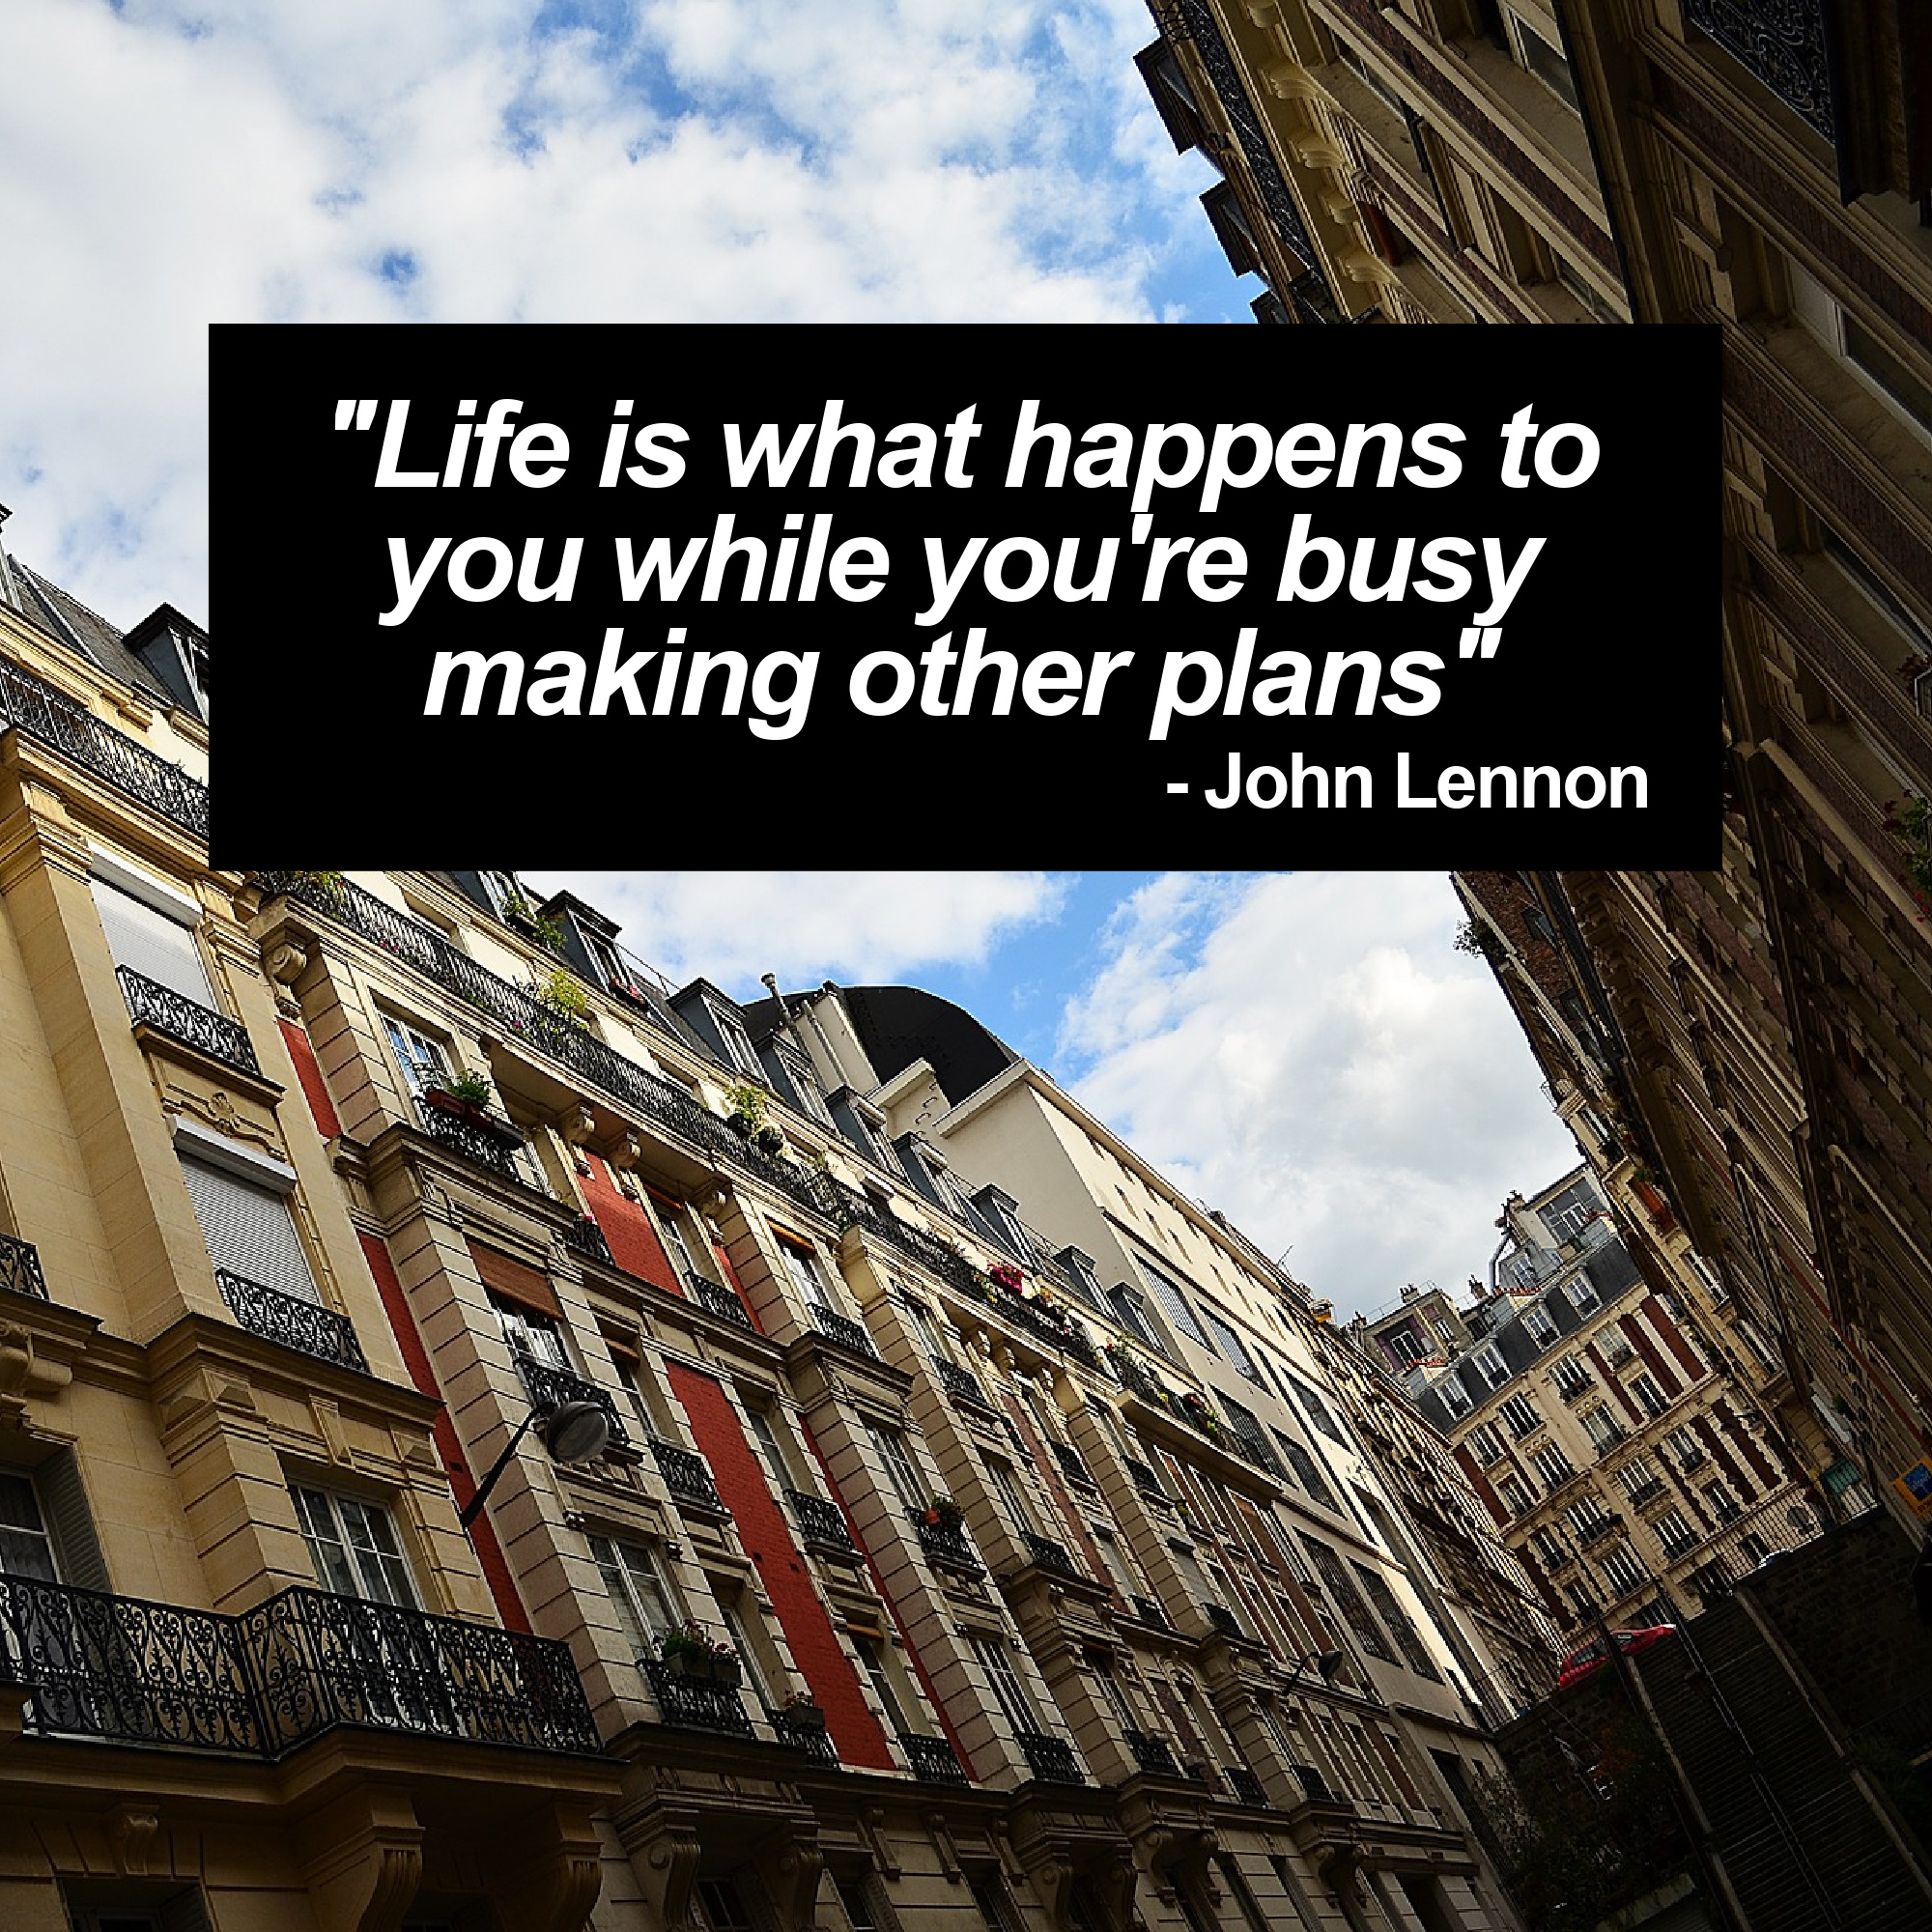 759. Life is what happens while you're busy making other plans